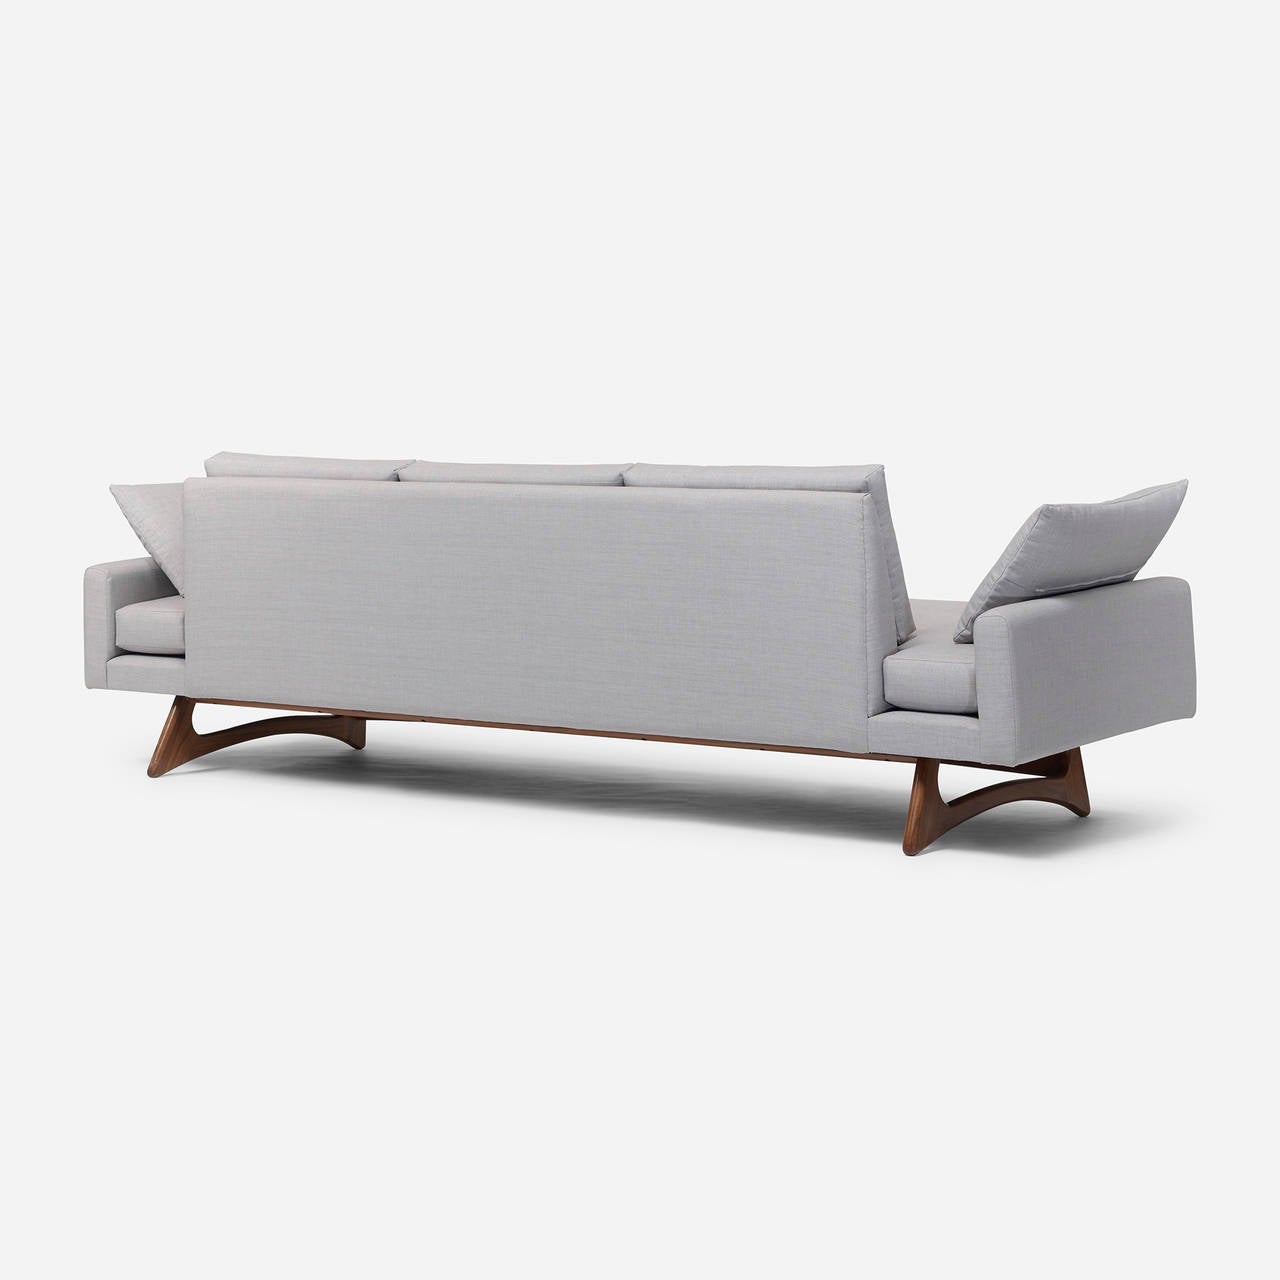 Sofa, model 2408 by Adrian Pearsall for Craft Associates.